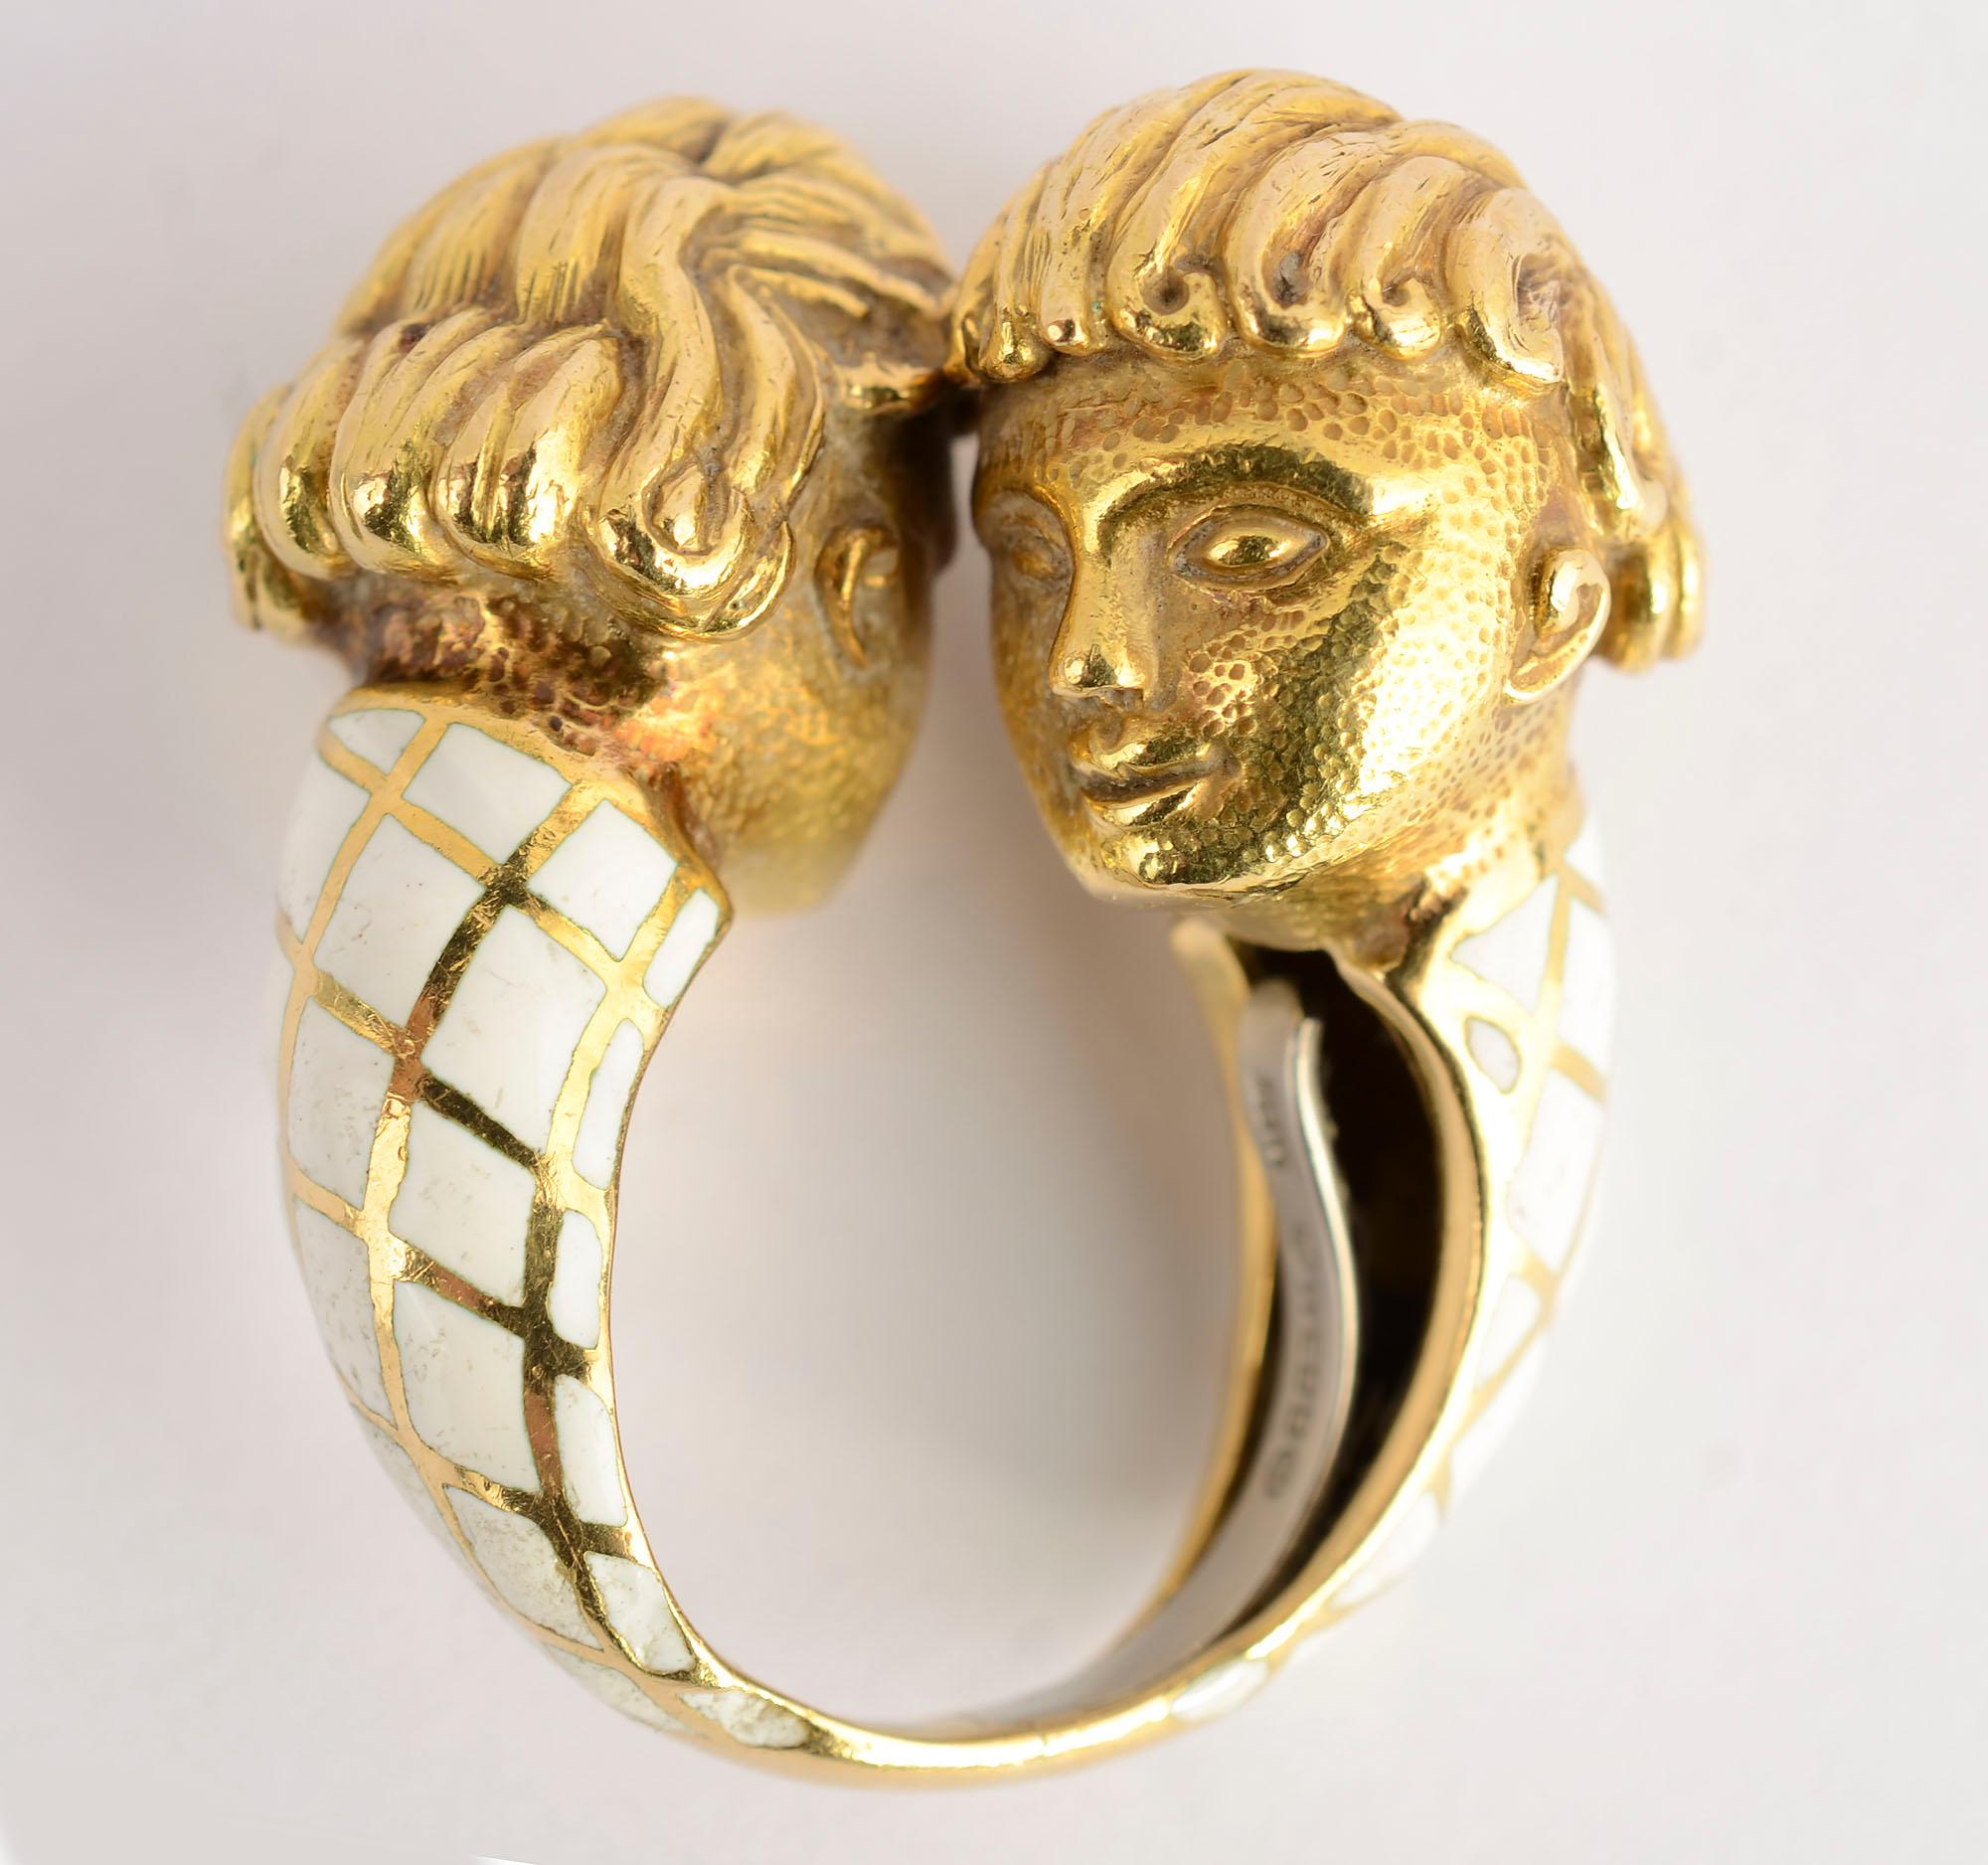 This most unusual ring by David Webb shows two faces in full three dimension. They may be cherubs or lovers as the viewer interprets. 
The body of the ring is the enamel diamond design often used by Webb. The bottom of the shank is plain gold so the